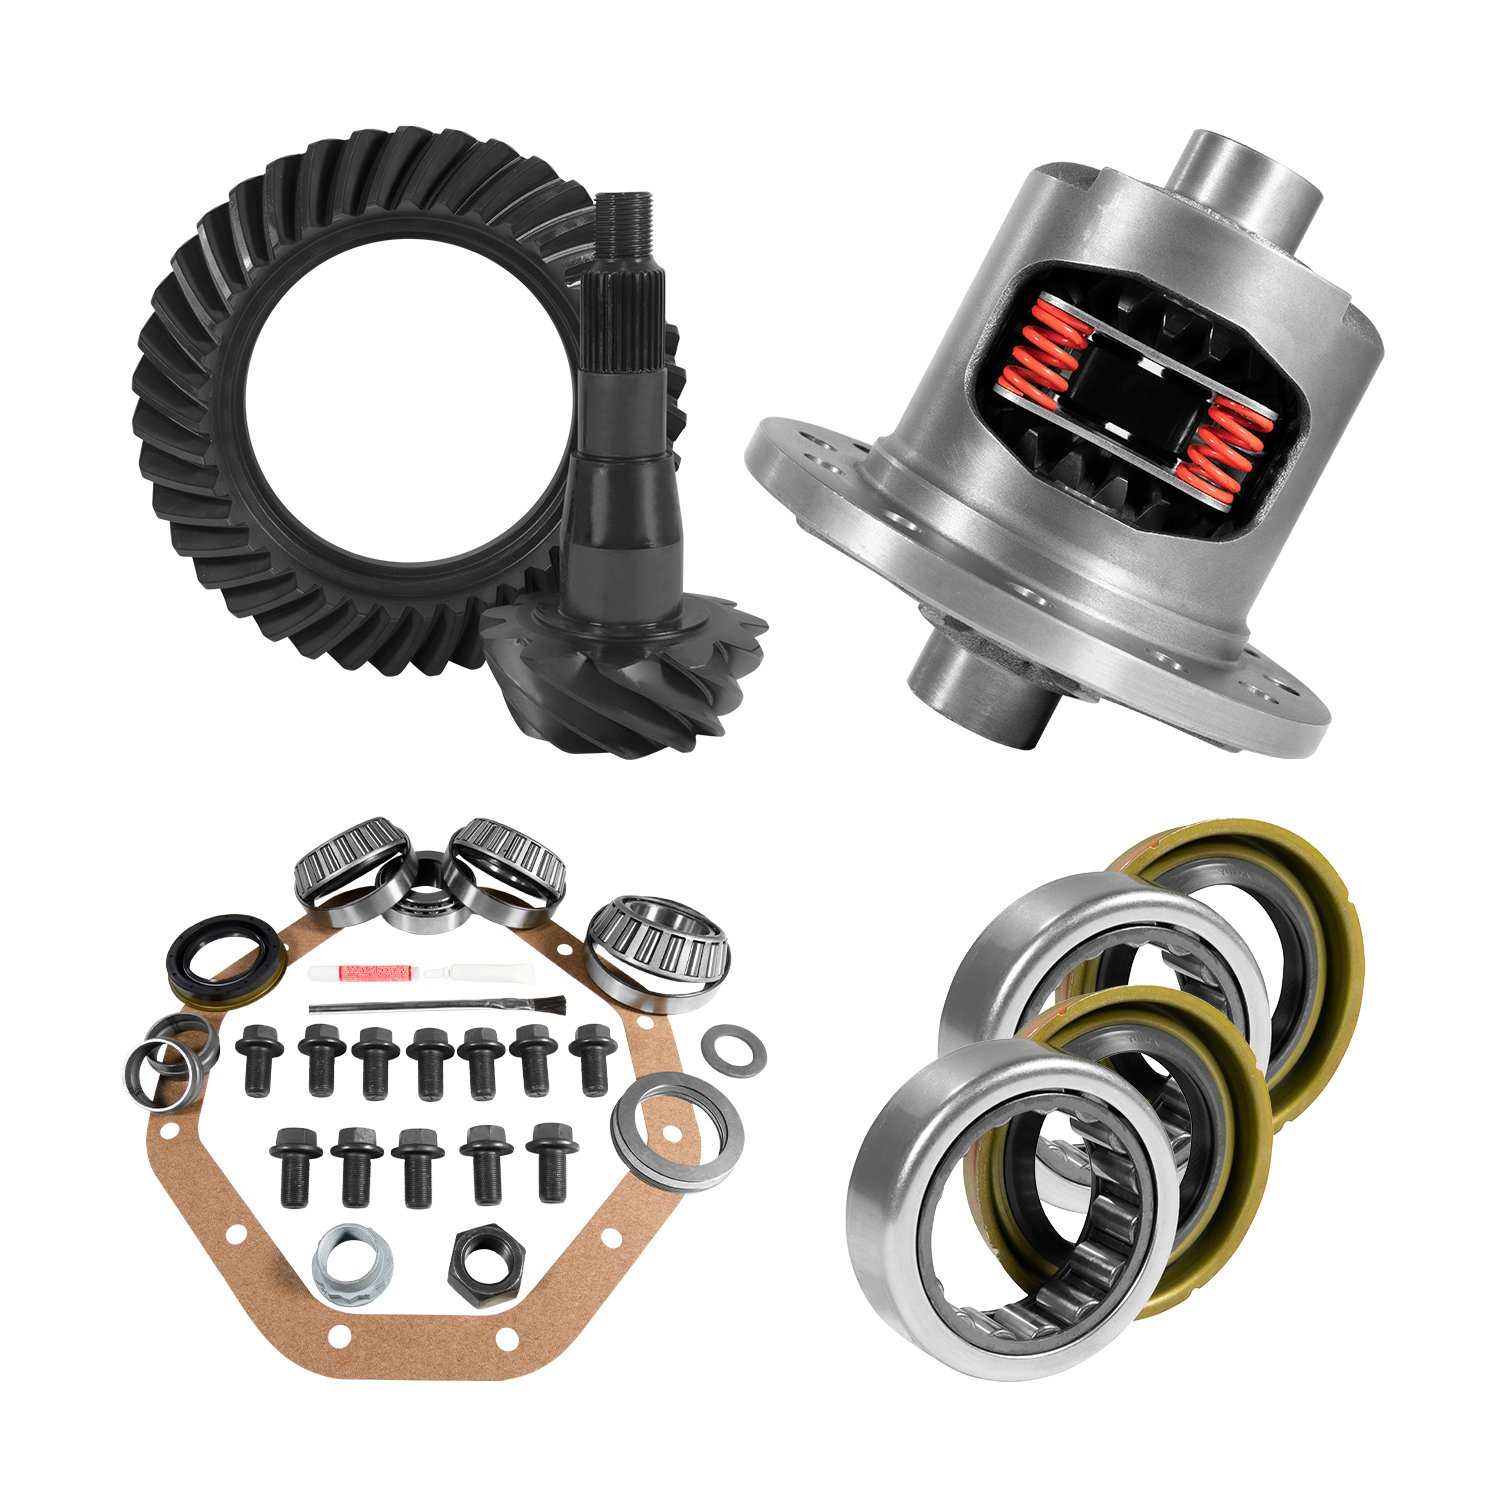 Zf 9.25 in. Chy 3.91 Rear Ring & Pinion, Install Kit, Posi, Axle Bearings & Seals